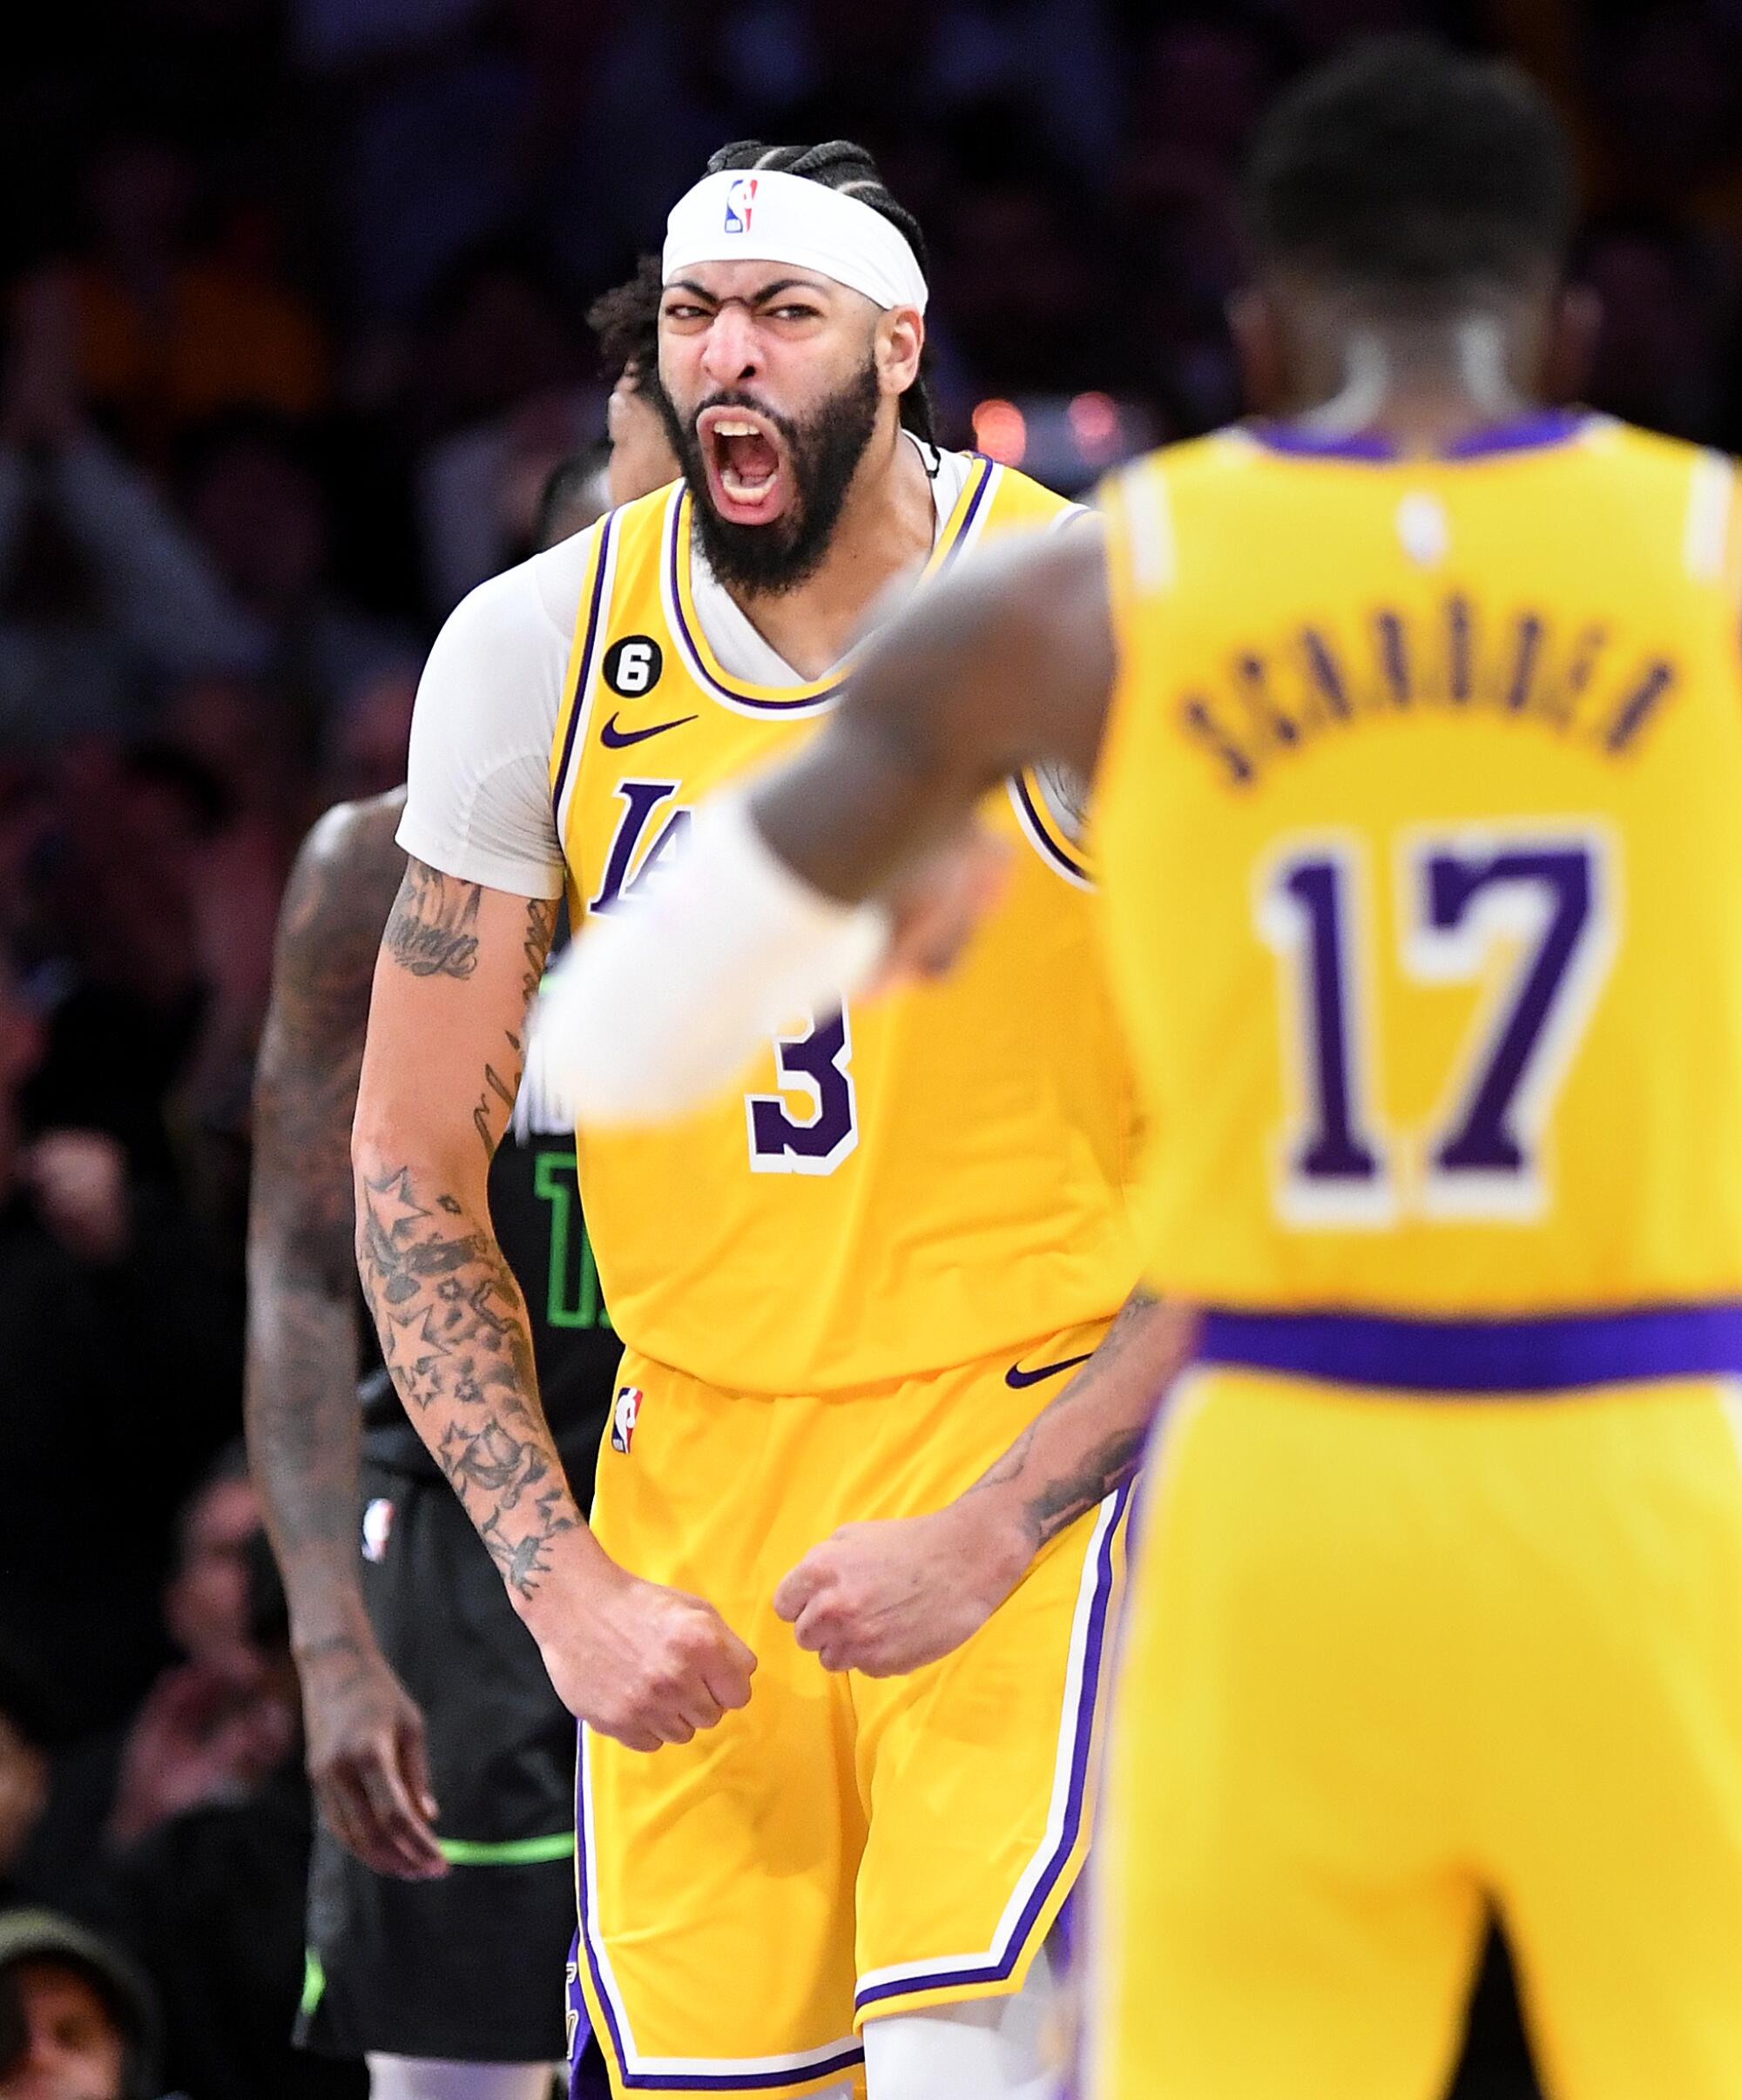 The Lakers' Anthony Davis celebrates scoring against the Timberwolves in overtime Tuesday